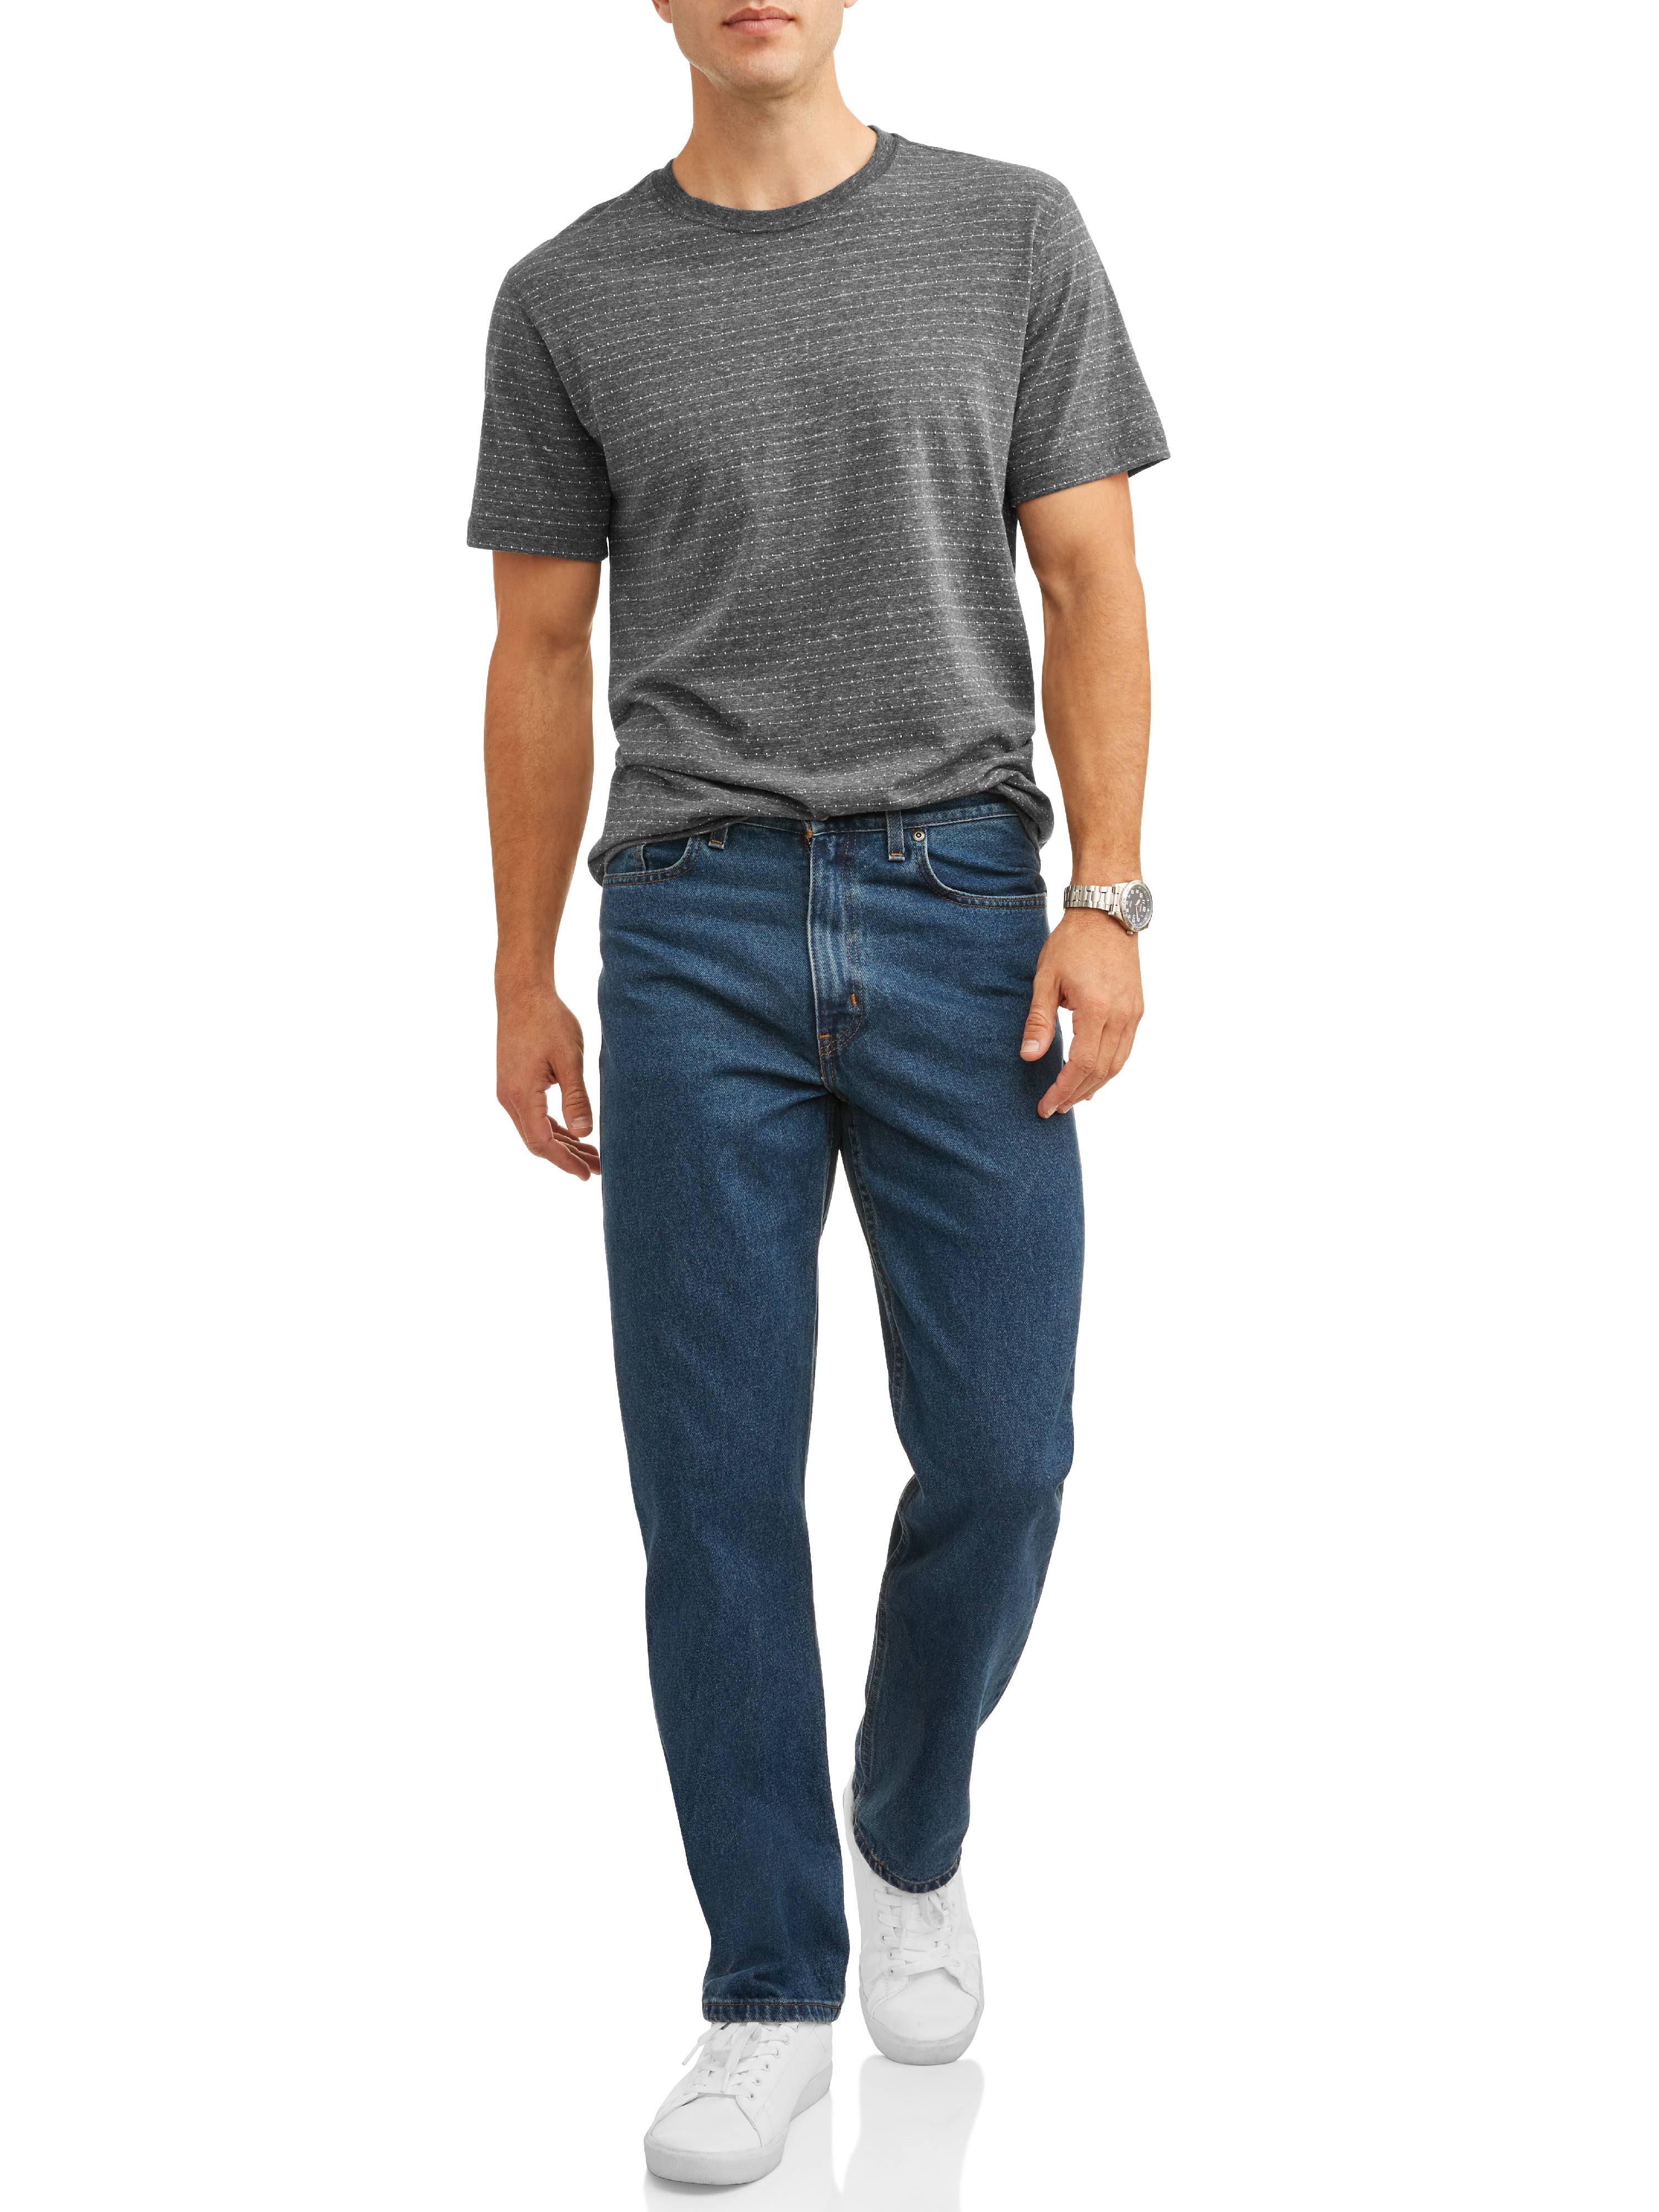 George Men's and Big Men's 100% Cotton Relaxed Fit Jeans - image 5 of 6